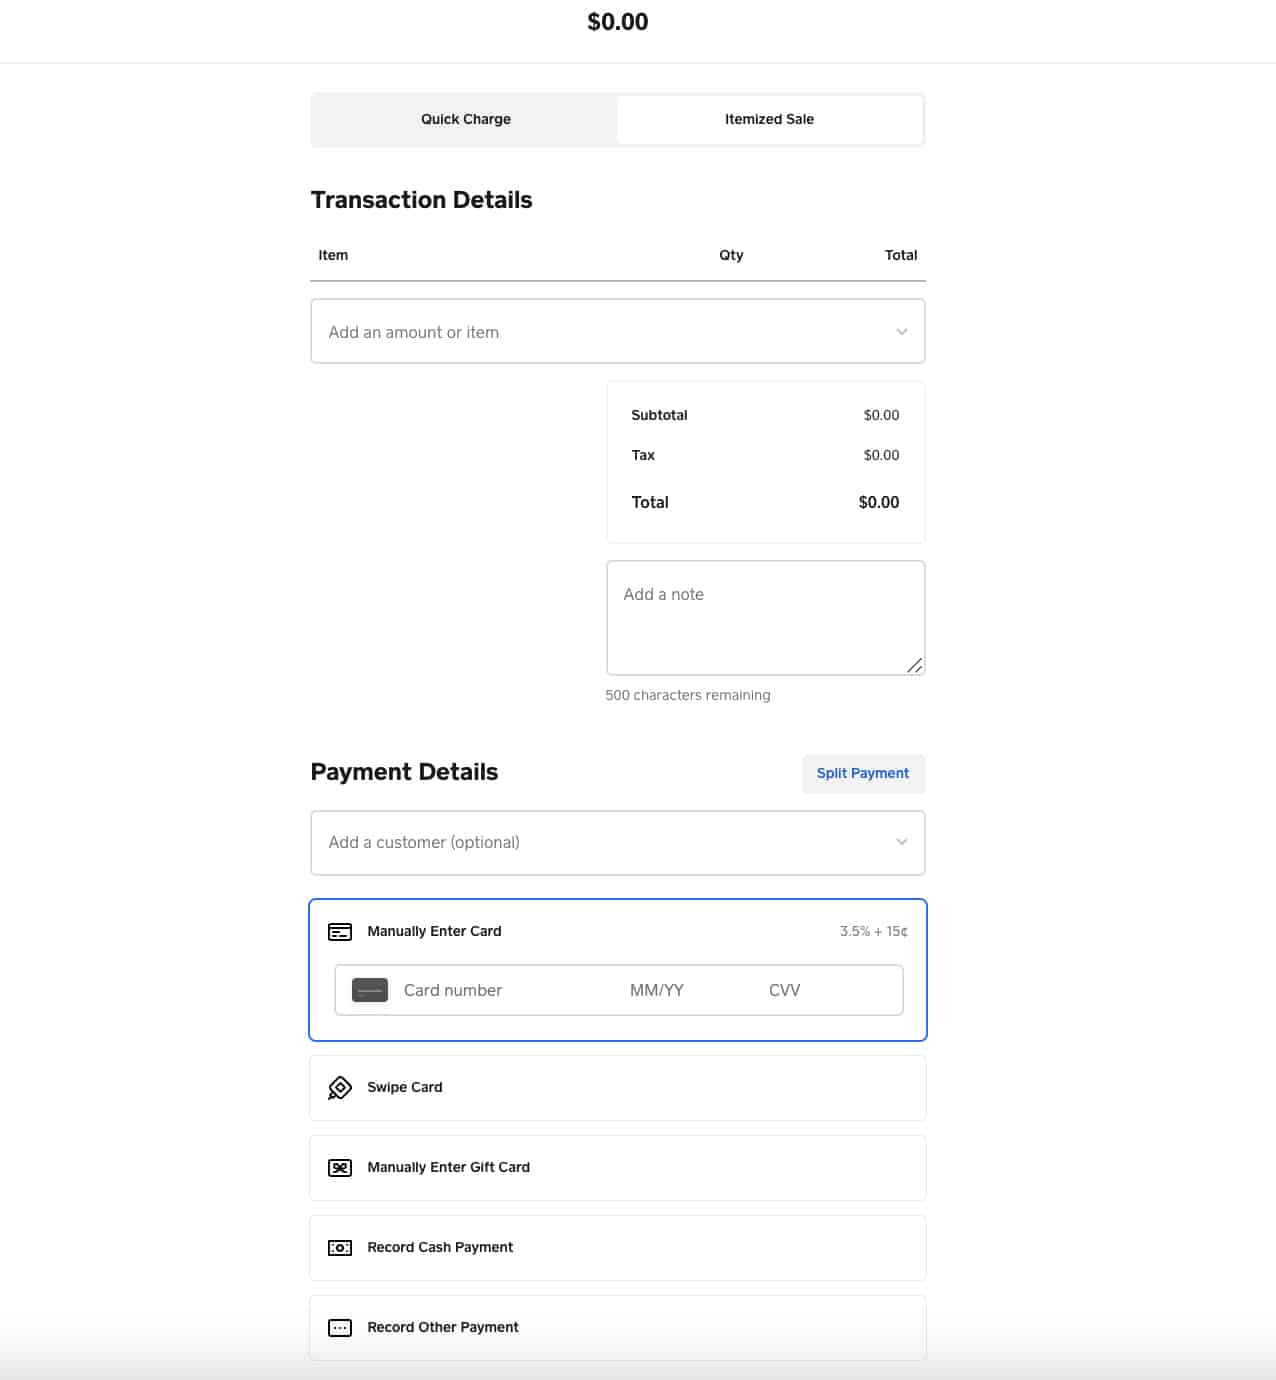 Image example of Square's checkout interface.